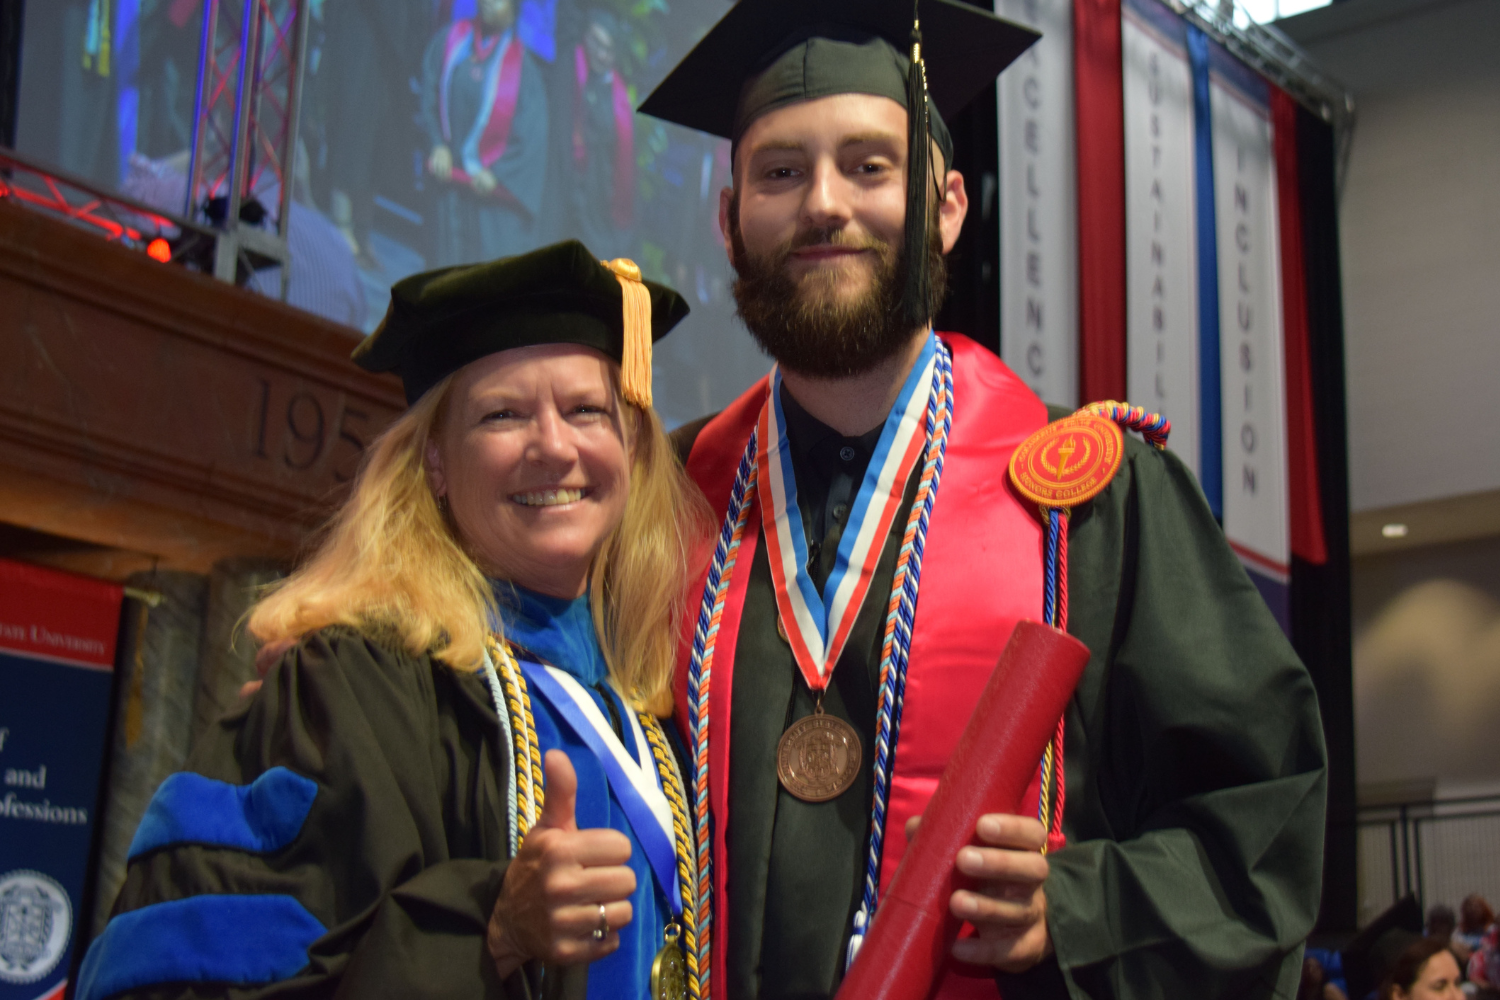 Dean Cindy Ticknor standing with a graduating student at a graduation ceremony